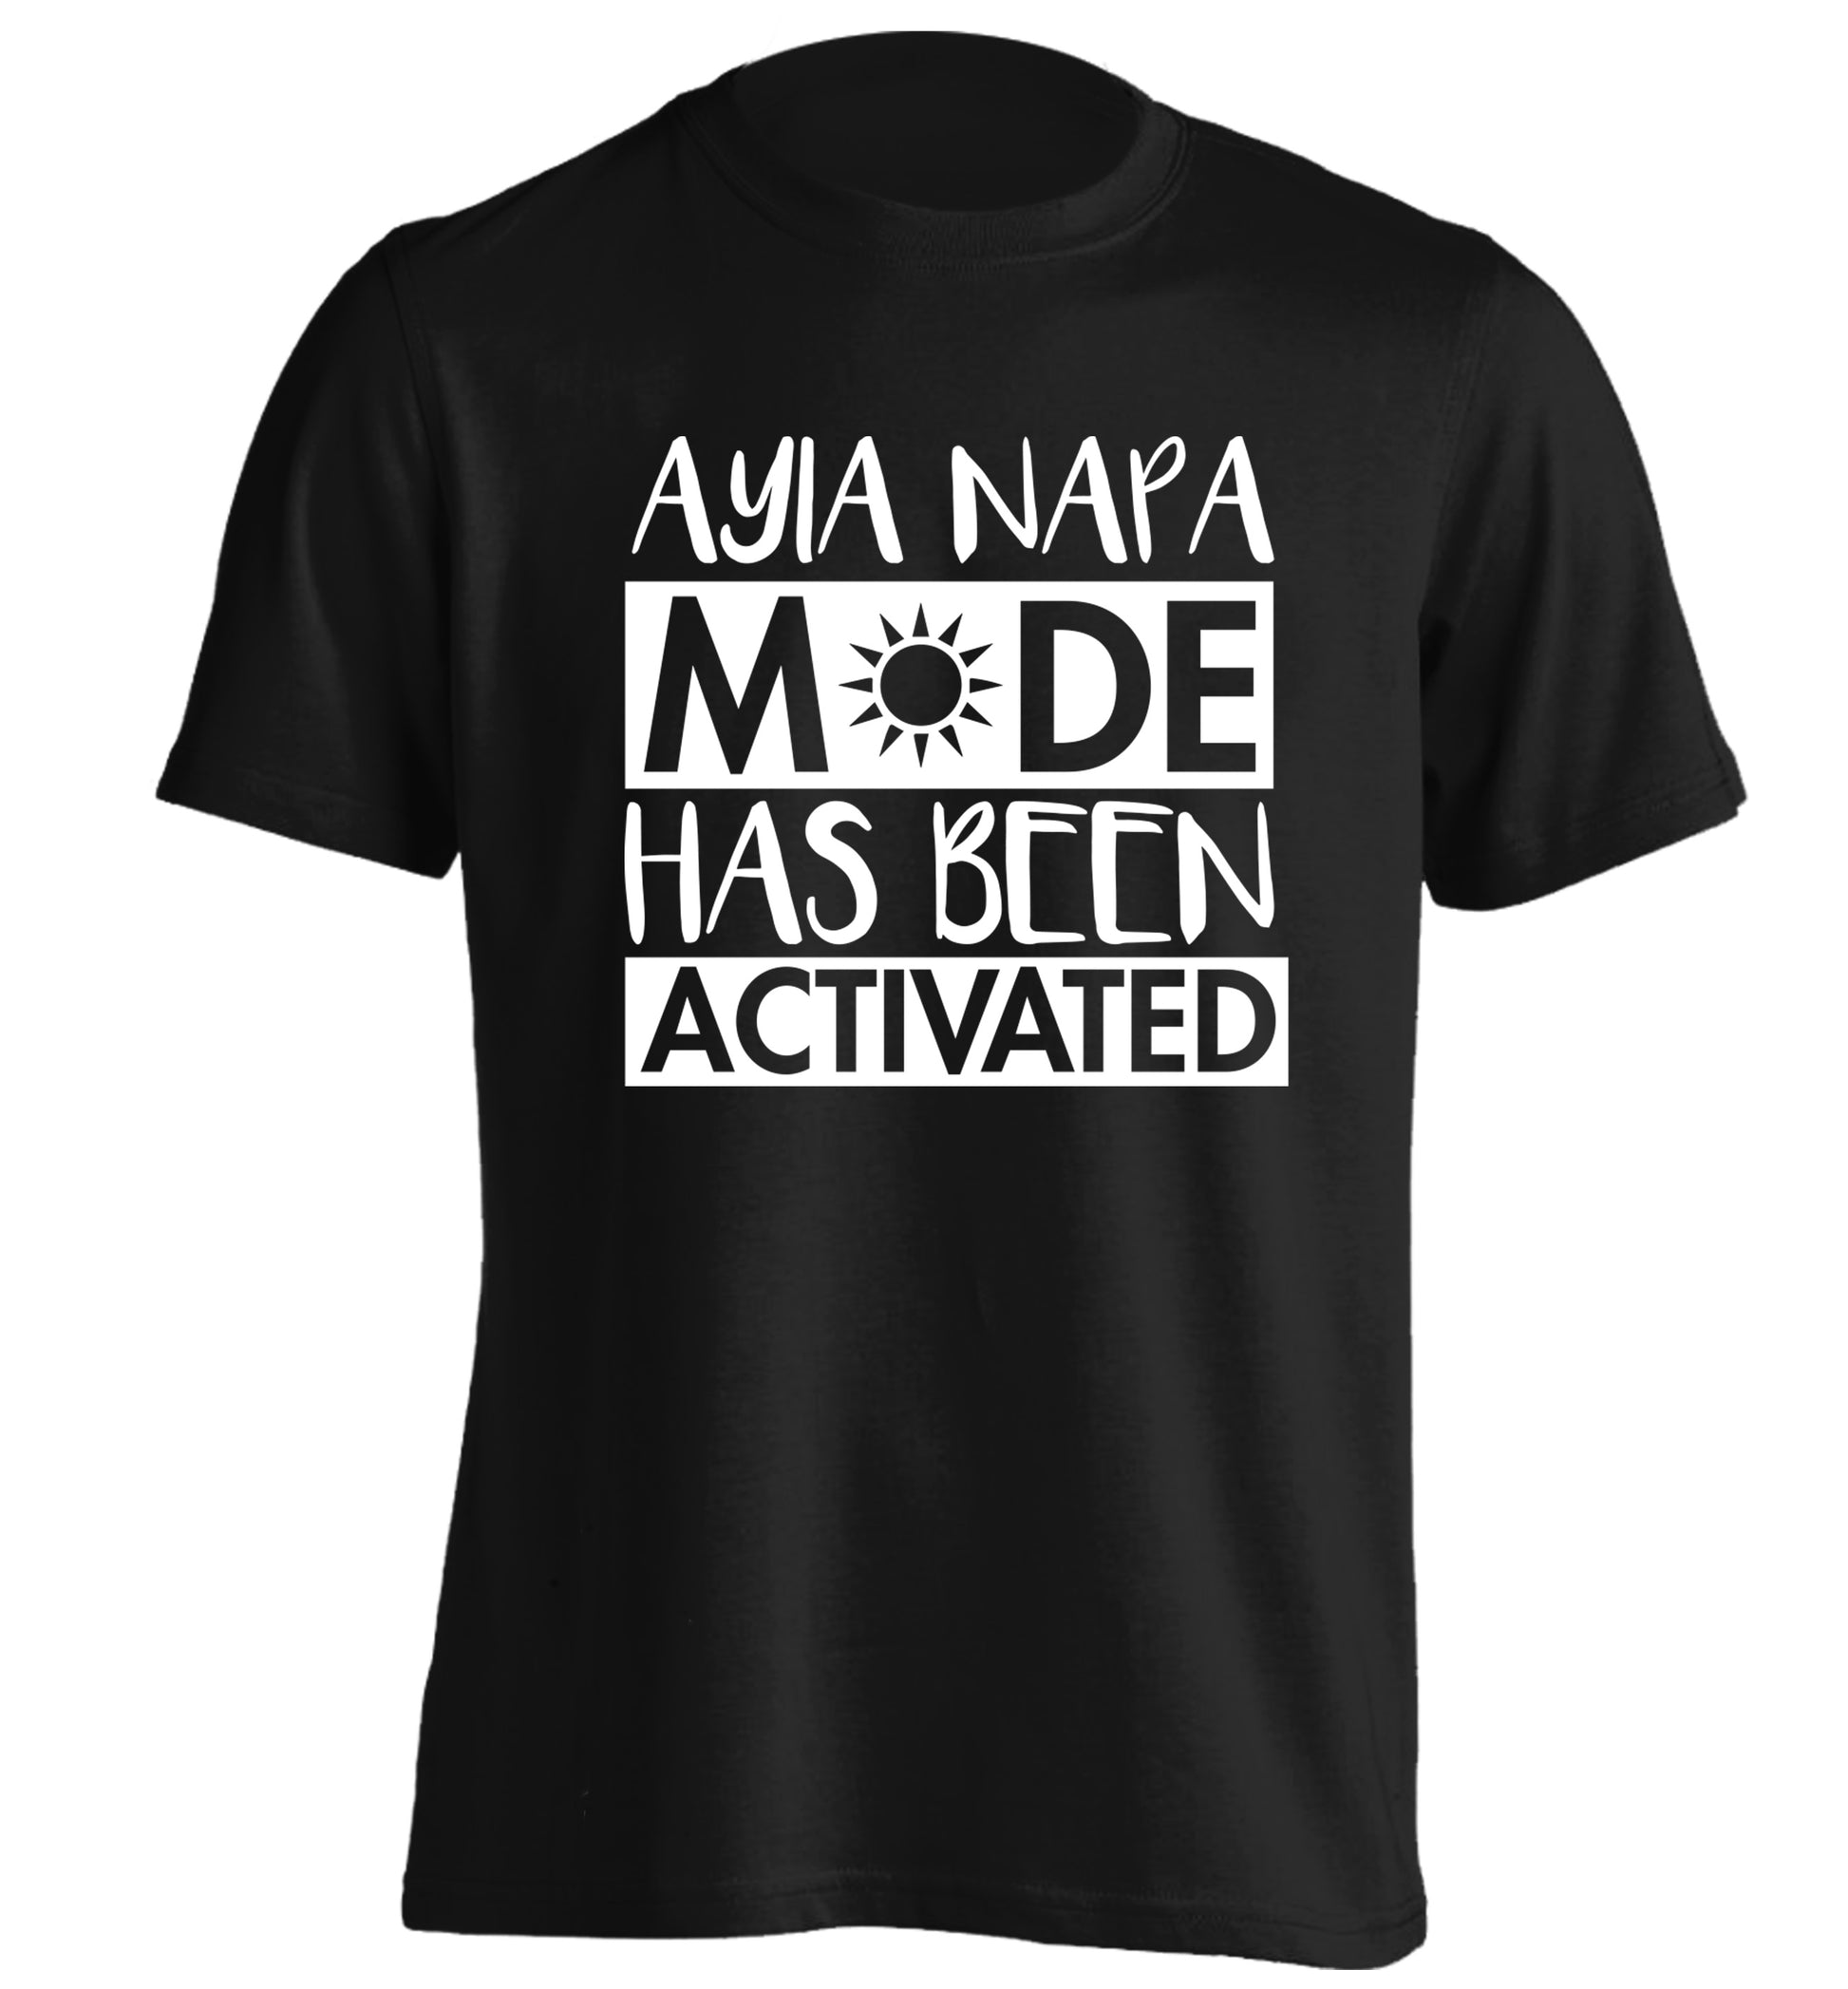 Ayia Napa mode has been activated adults unisex black Tshirt 2XL